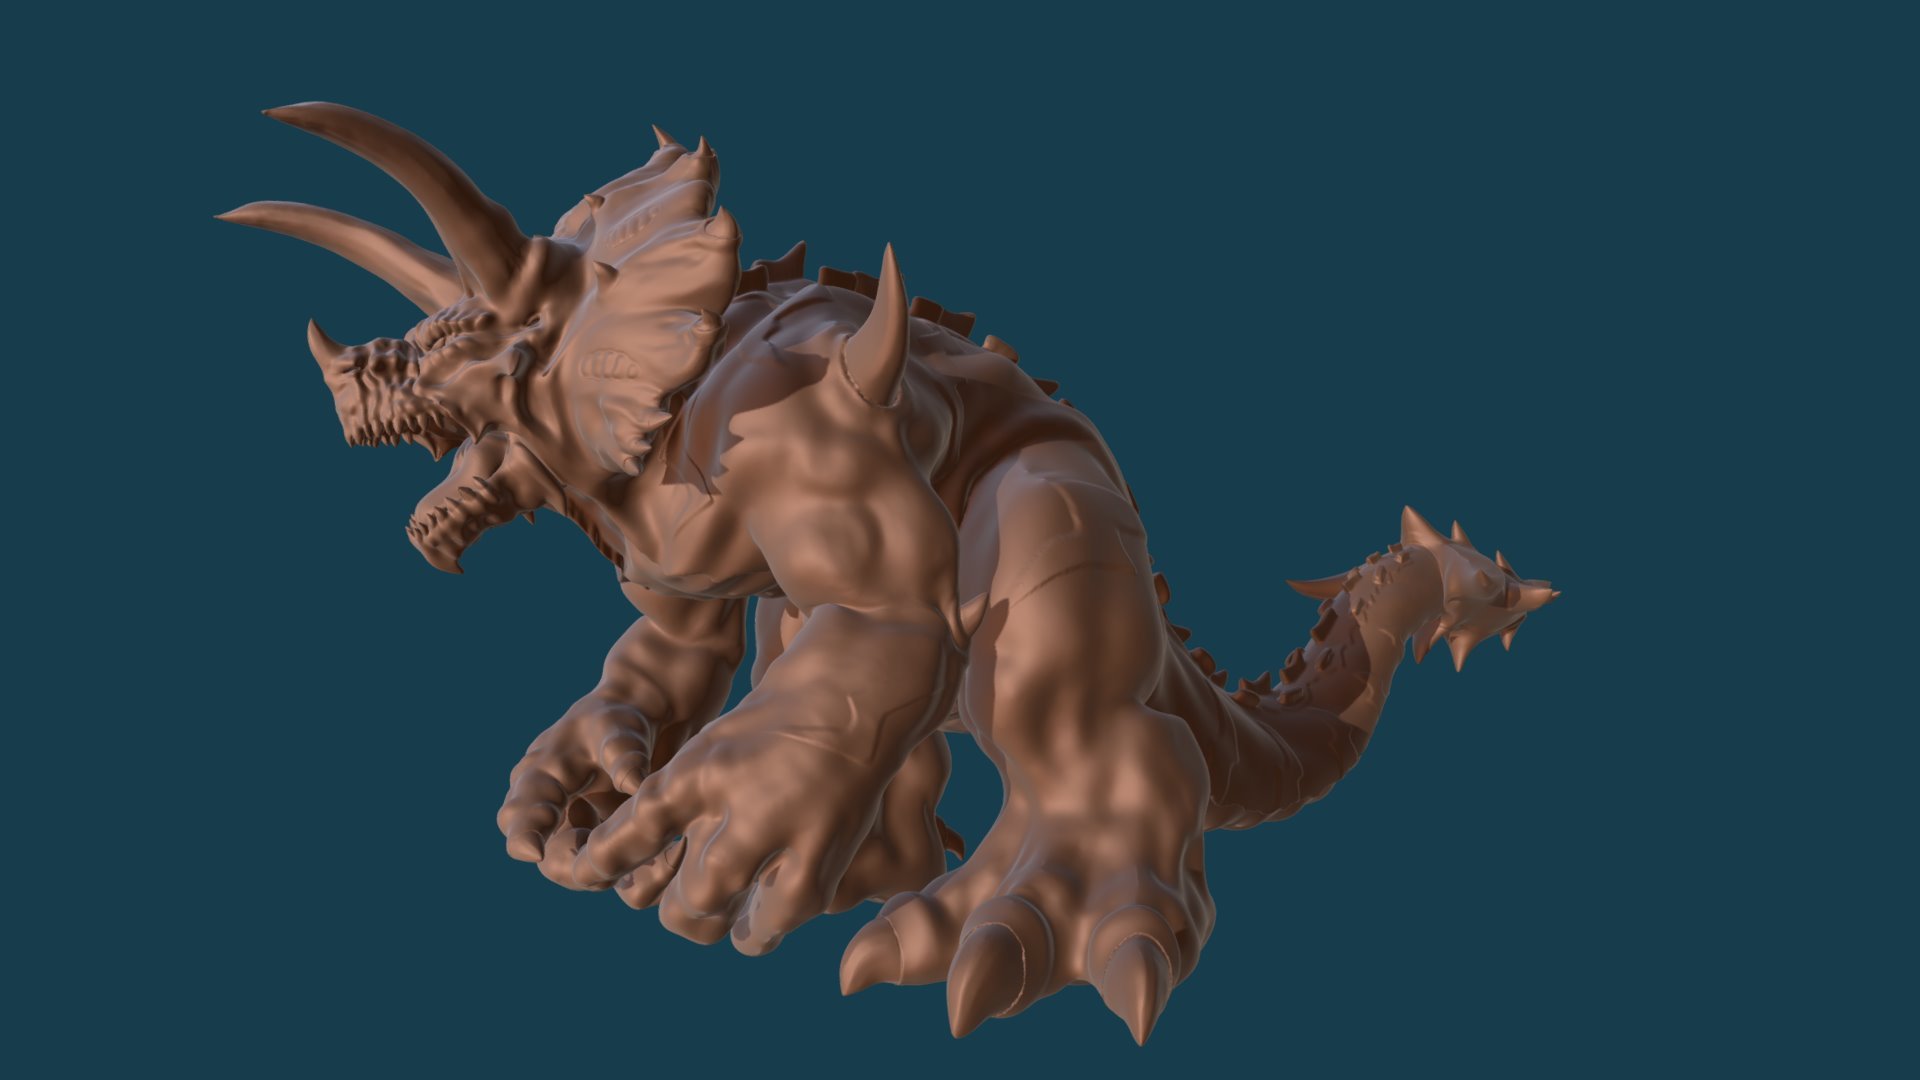 Another attempt at Tyrantasaur where I tried to clean up the form and add as many details as my pc would allow. A single piece sculpt 3d model